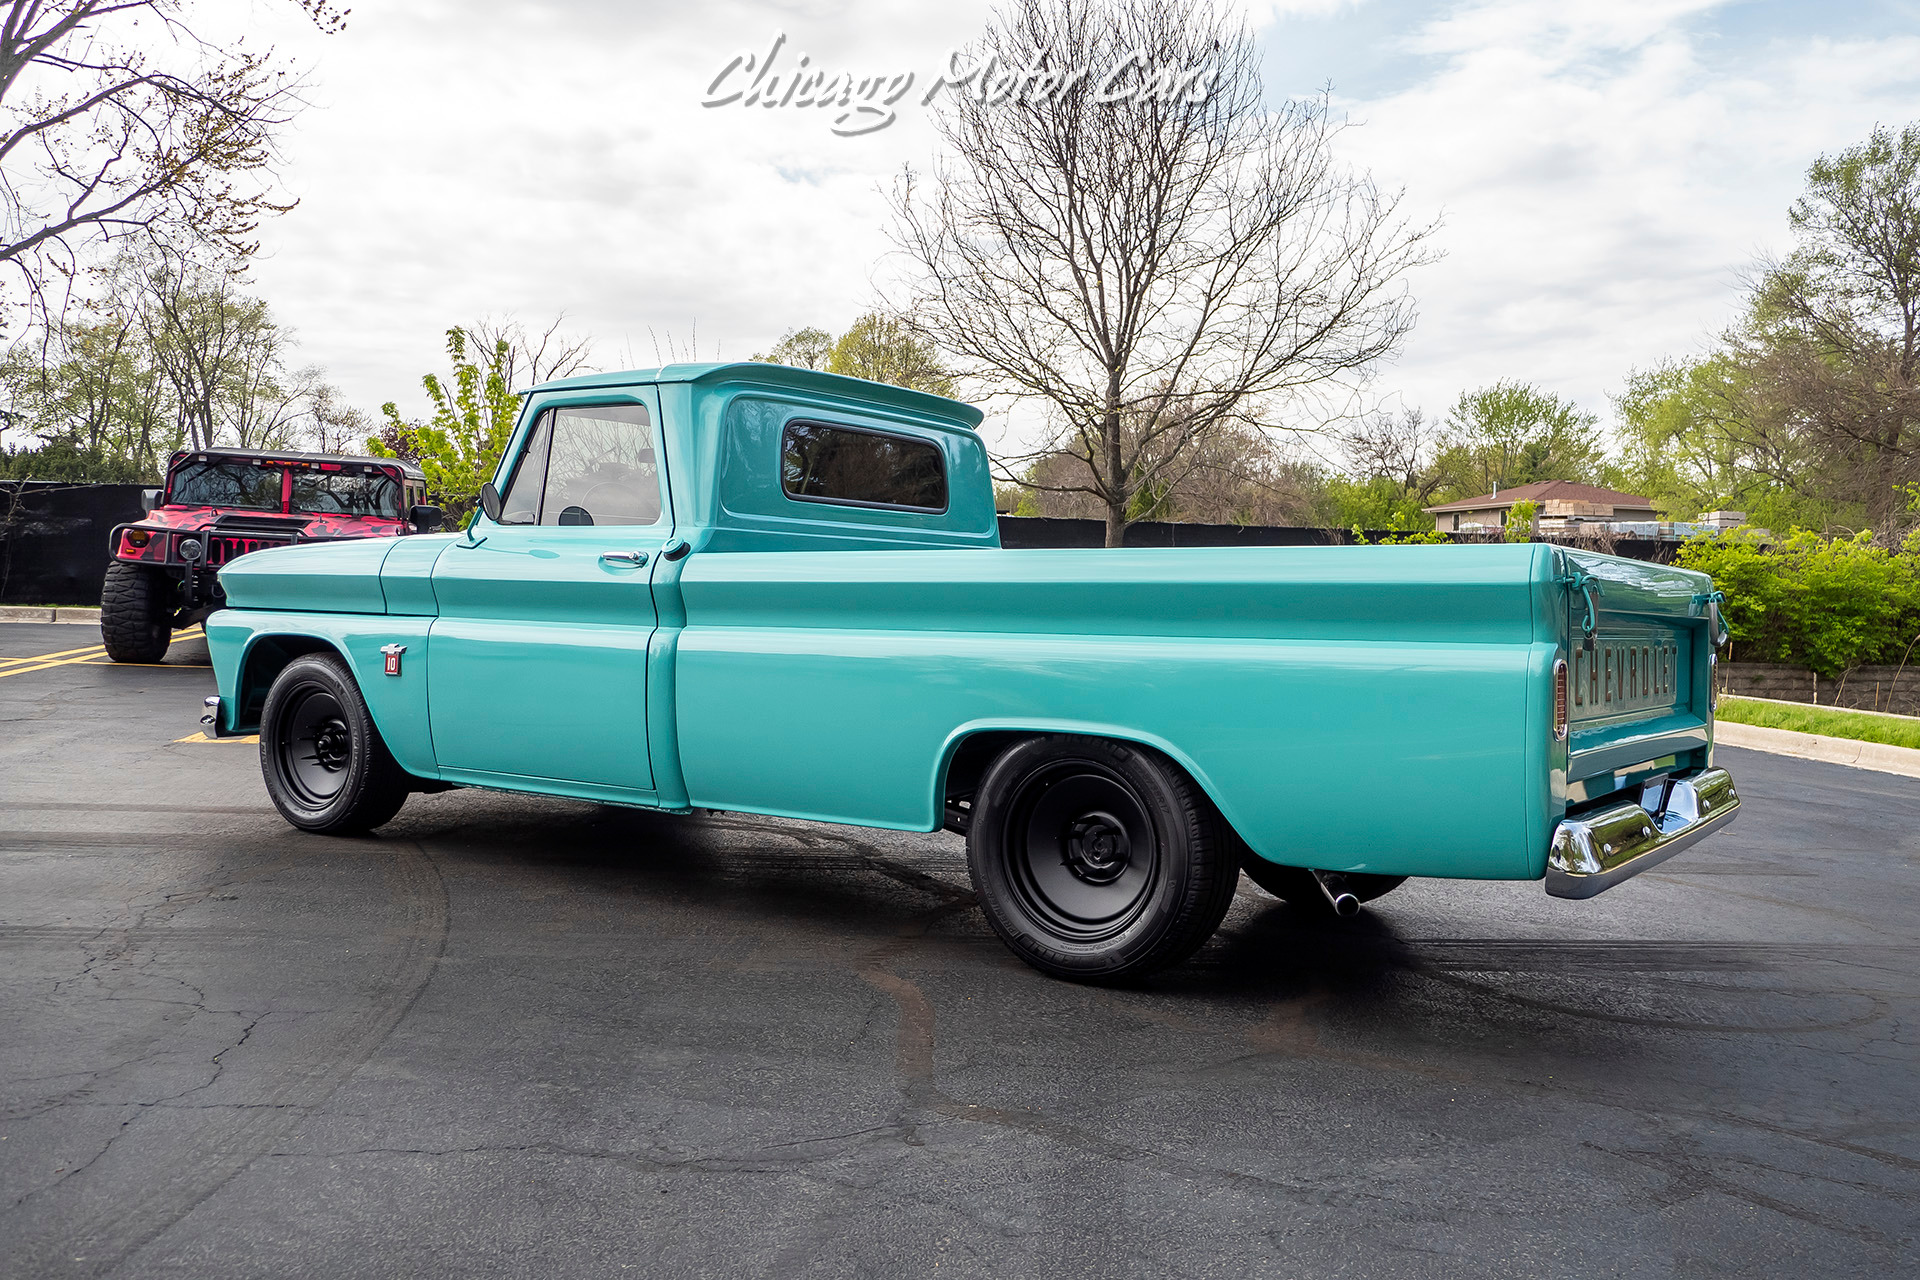 Used-1964-Chevrolet-C10-Pickup-FULL-Restoration-ONLY-1K-Miles-Jaw-Dropping-Build